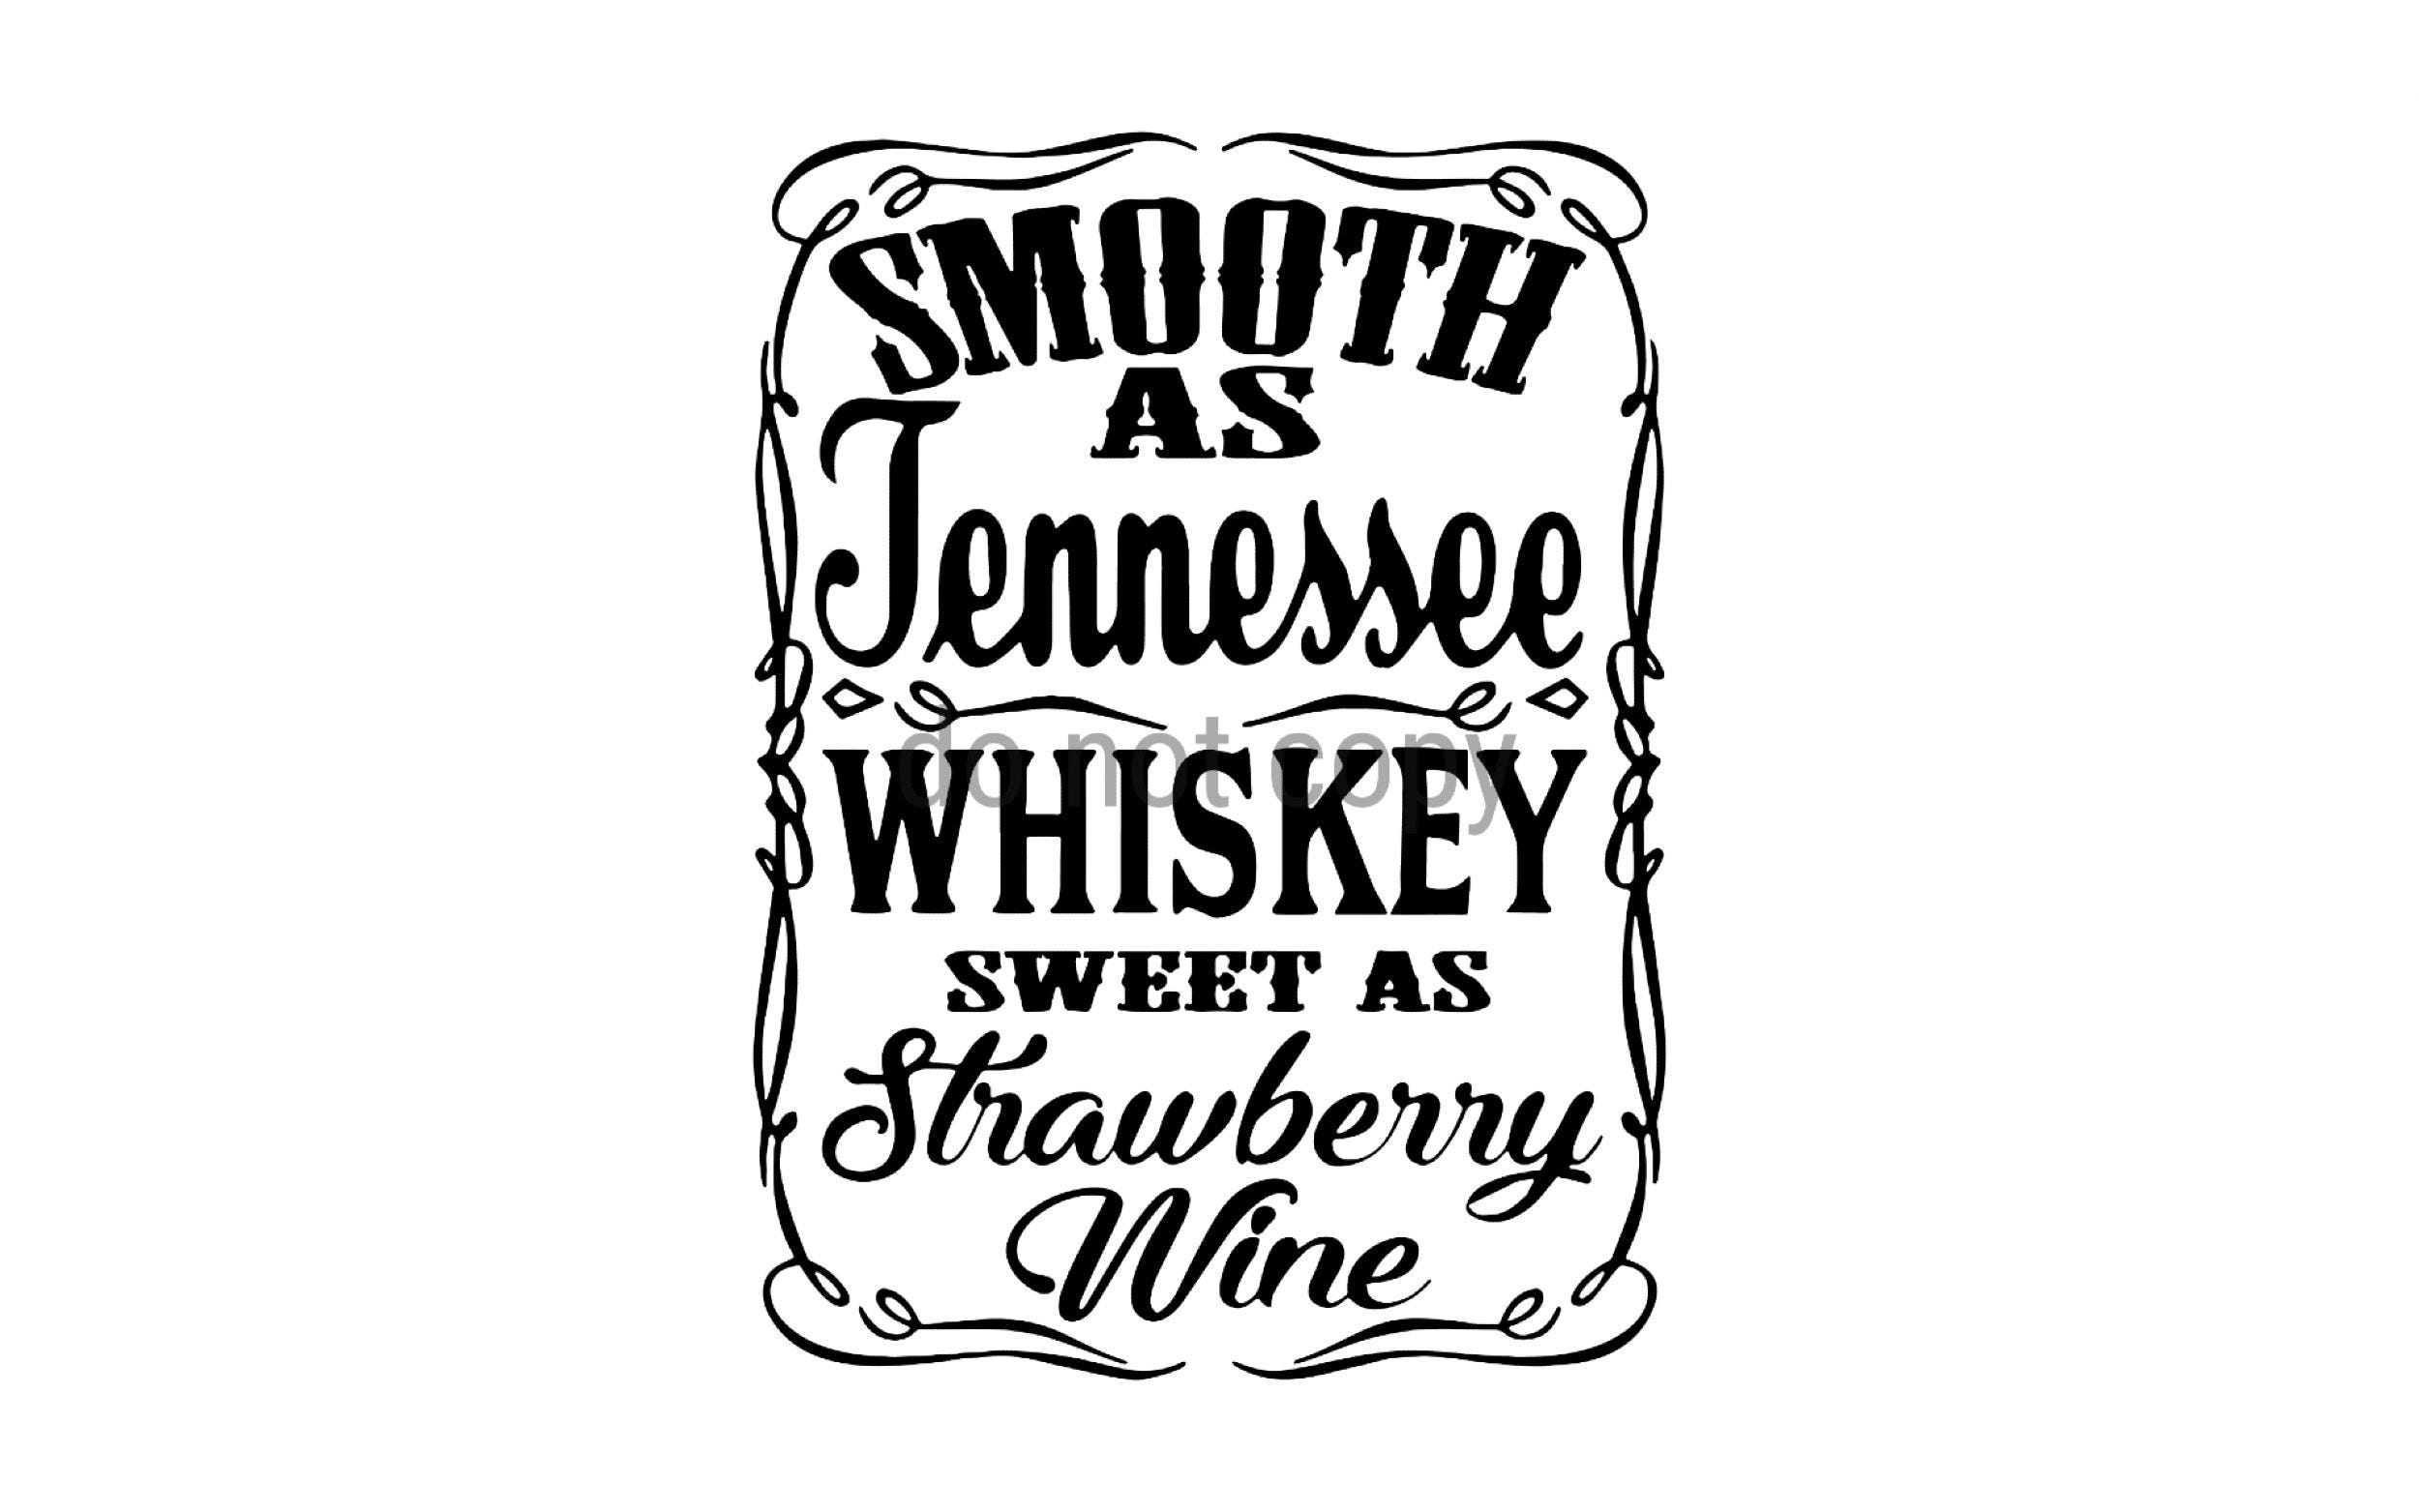 Smooth as Tennessee Whisky Sweet as Strawberry Wine Digital Download Svg PNG Eps Dxf